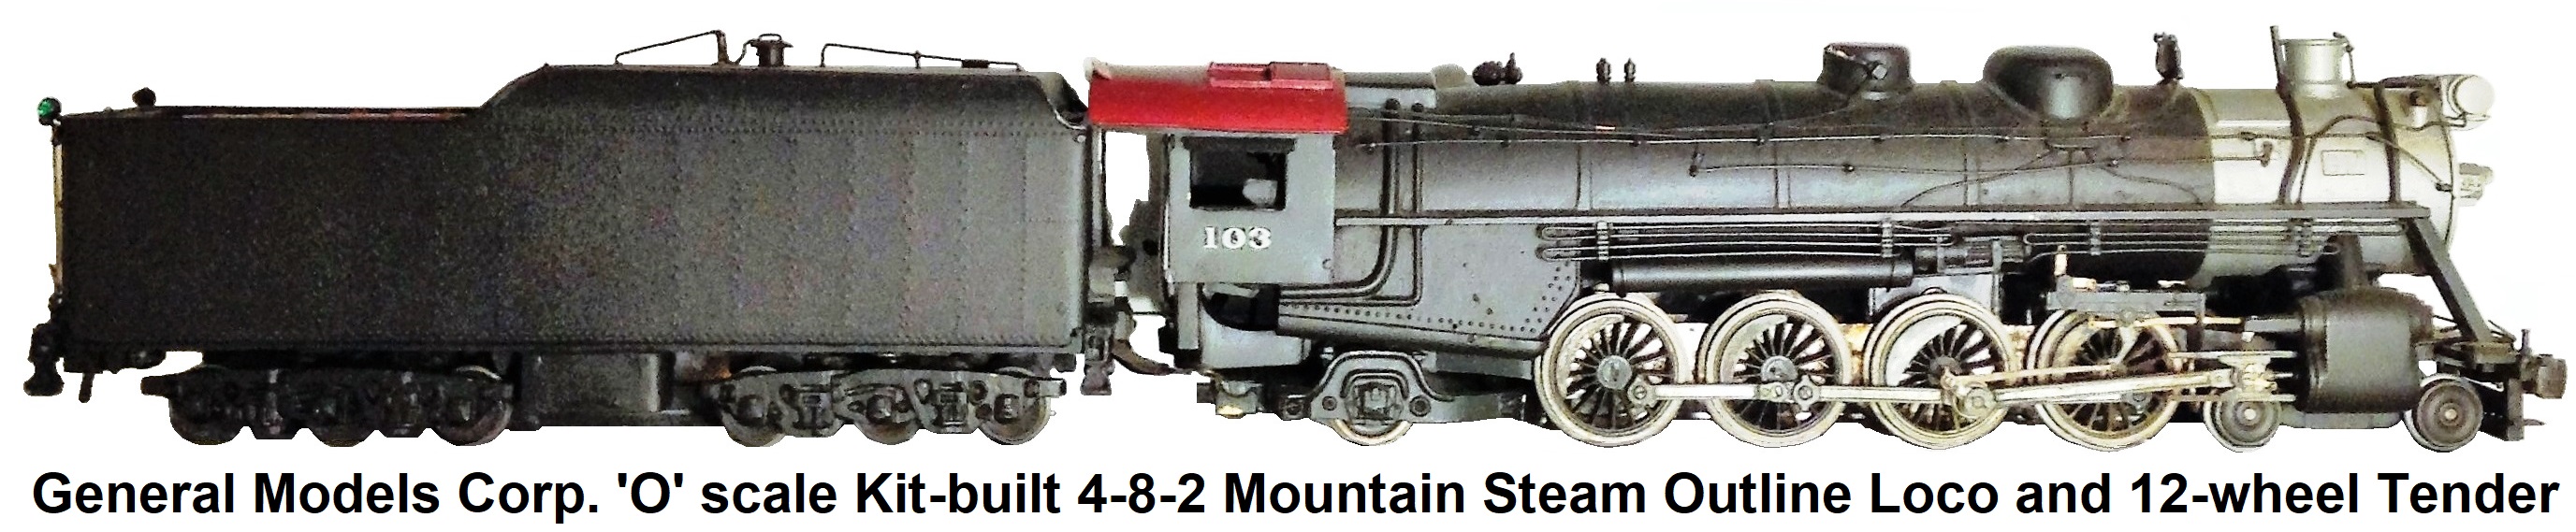 General Models Corp. 'O' scale Kit-built 4-8-2 Mountain loco and 12-wheel tender